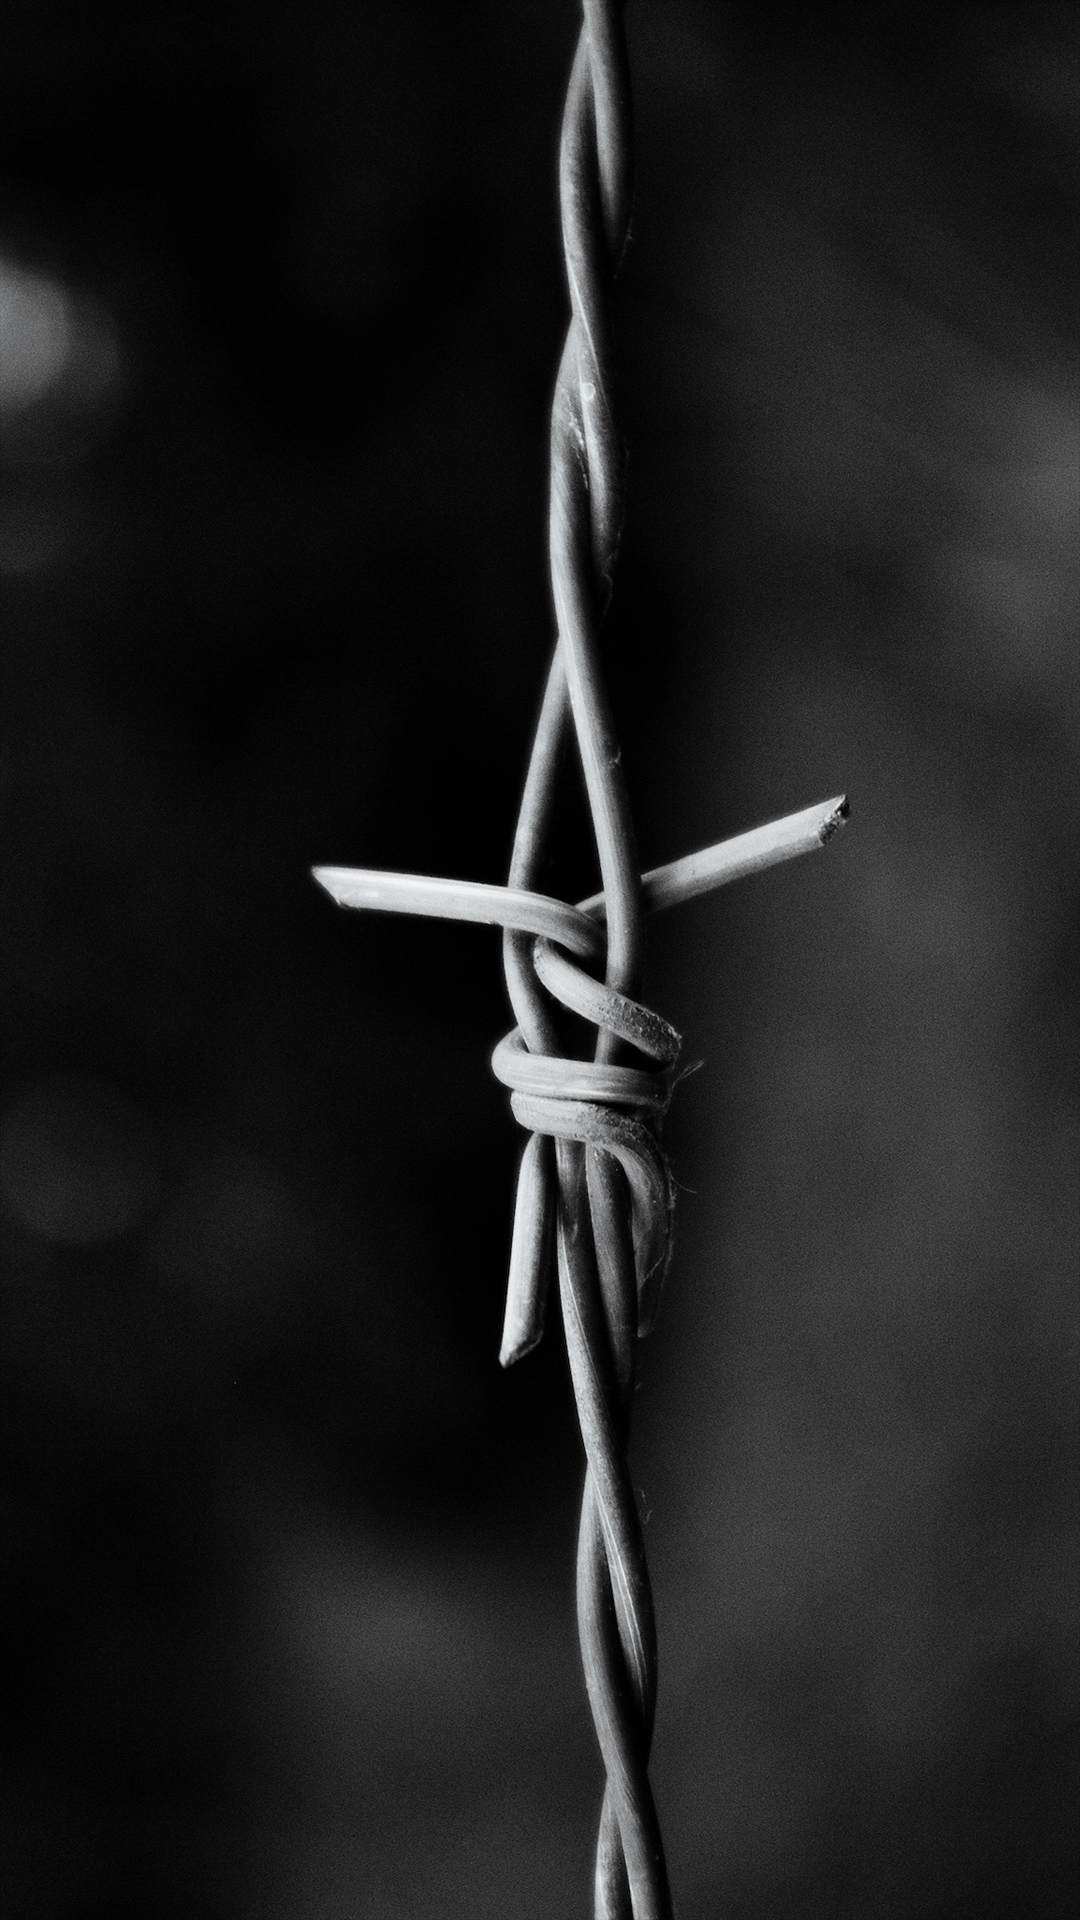 Barbed Wire Phone Wallpaper - Hd Samsung Galaxy A5 2016 , HD Wallpaper & Backgrounds